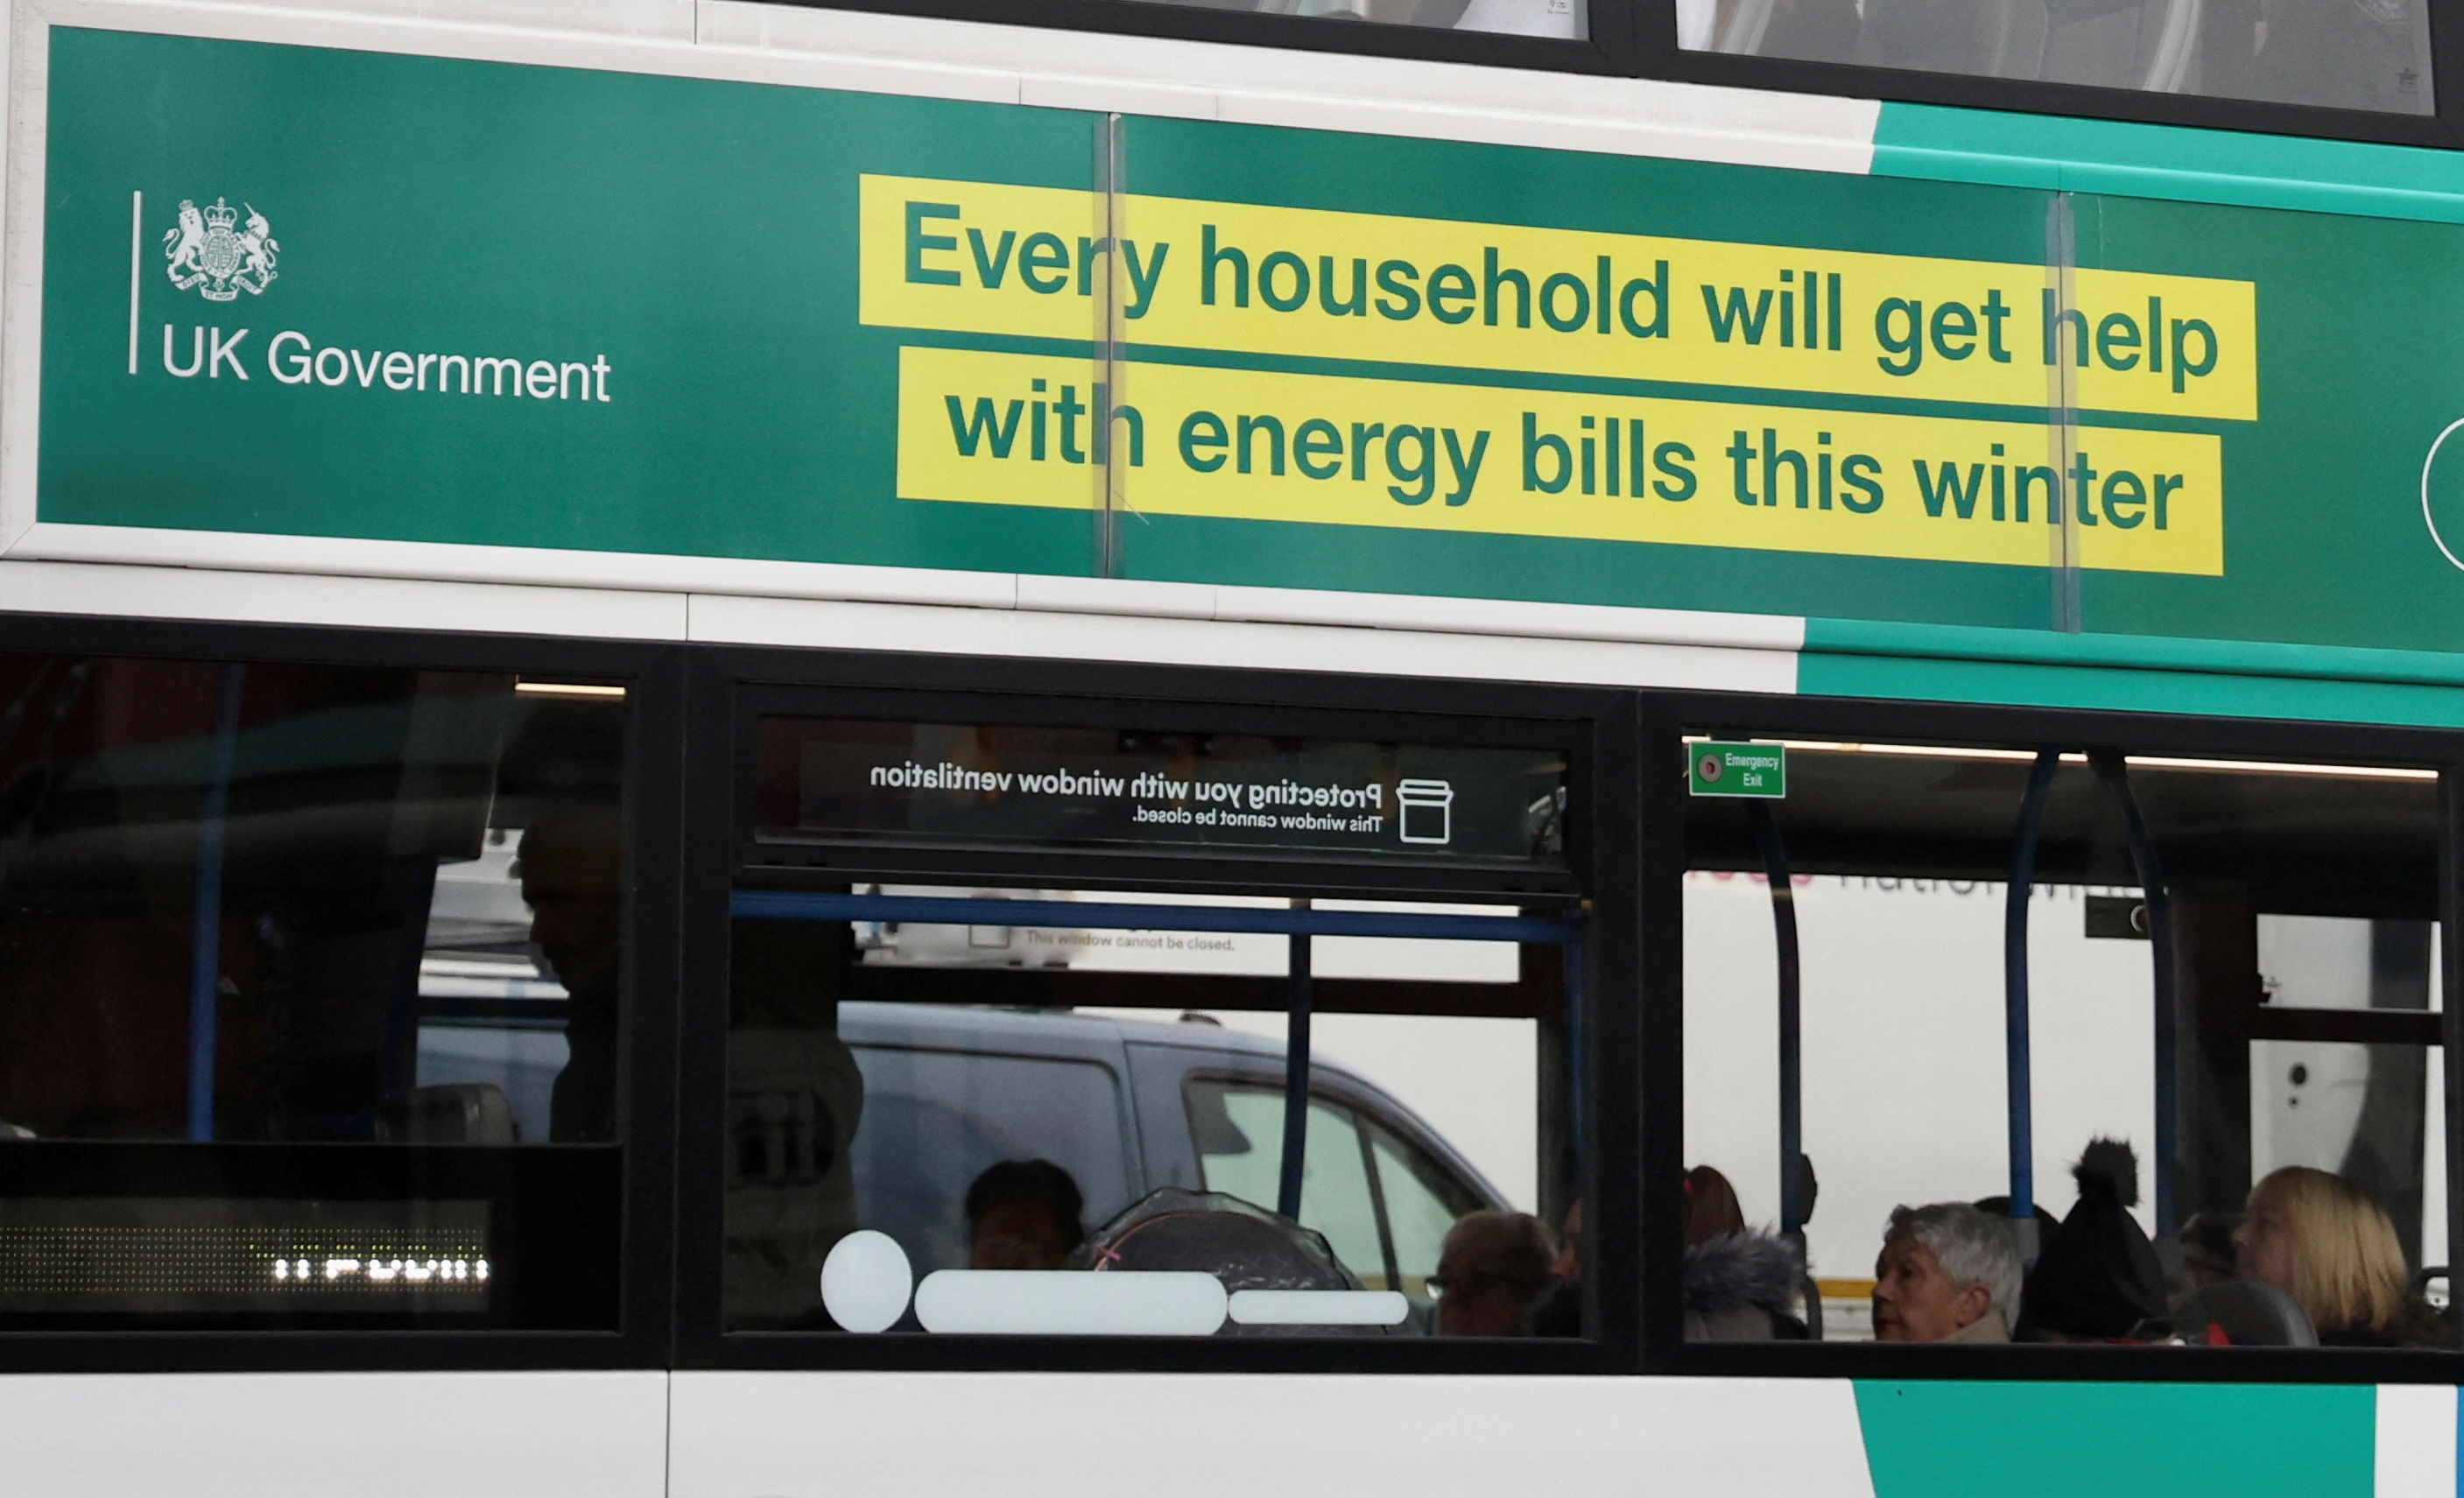 A British government advert offering people help with winter energy bills is seen on the side of a bus in Stockport